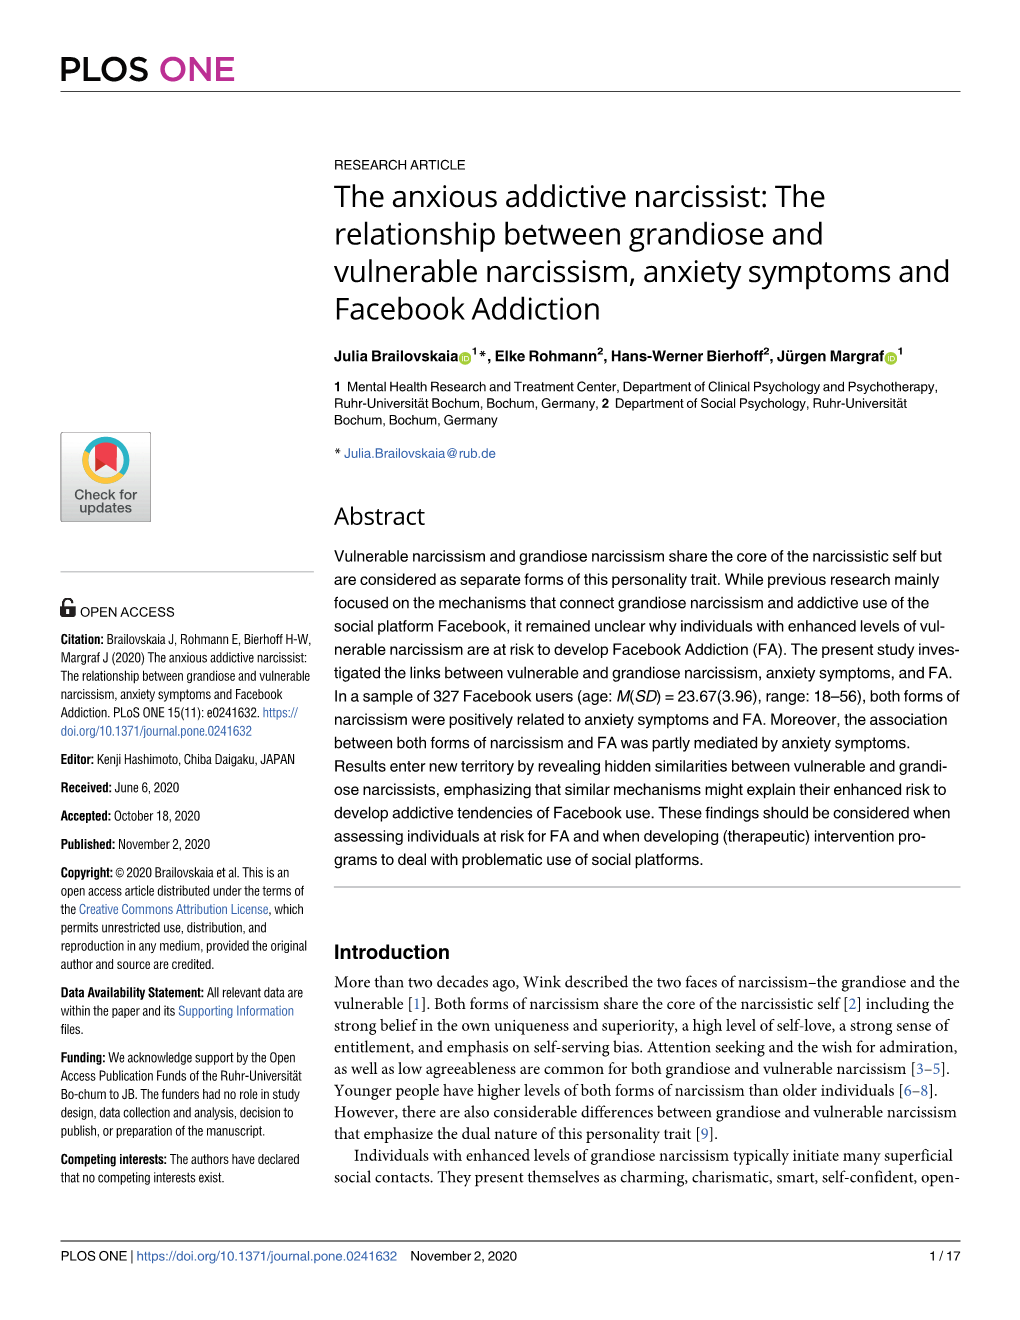 The Relationship Between Grandiose and Vulnerable Narcissism, Anxiety Symptoms and Facebook Addiction